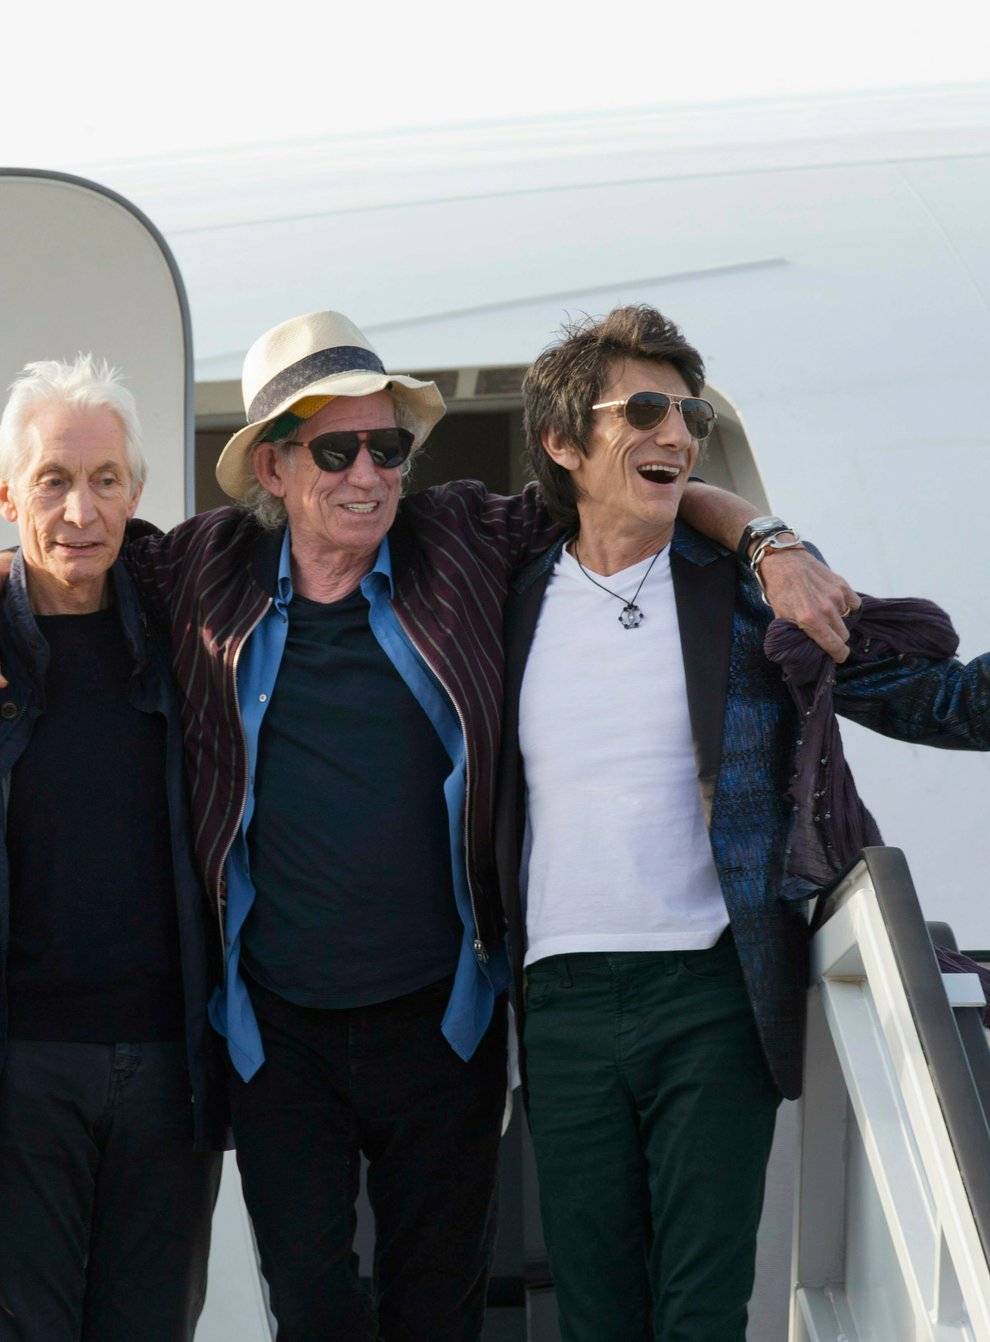 The Rolling Stones have not authorised use of their music at Trump rallies